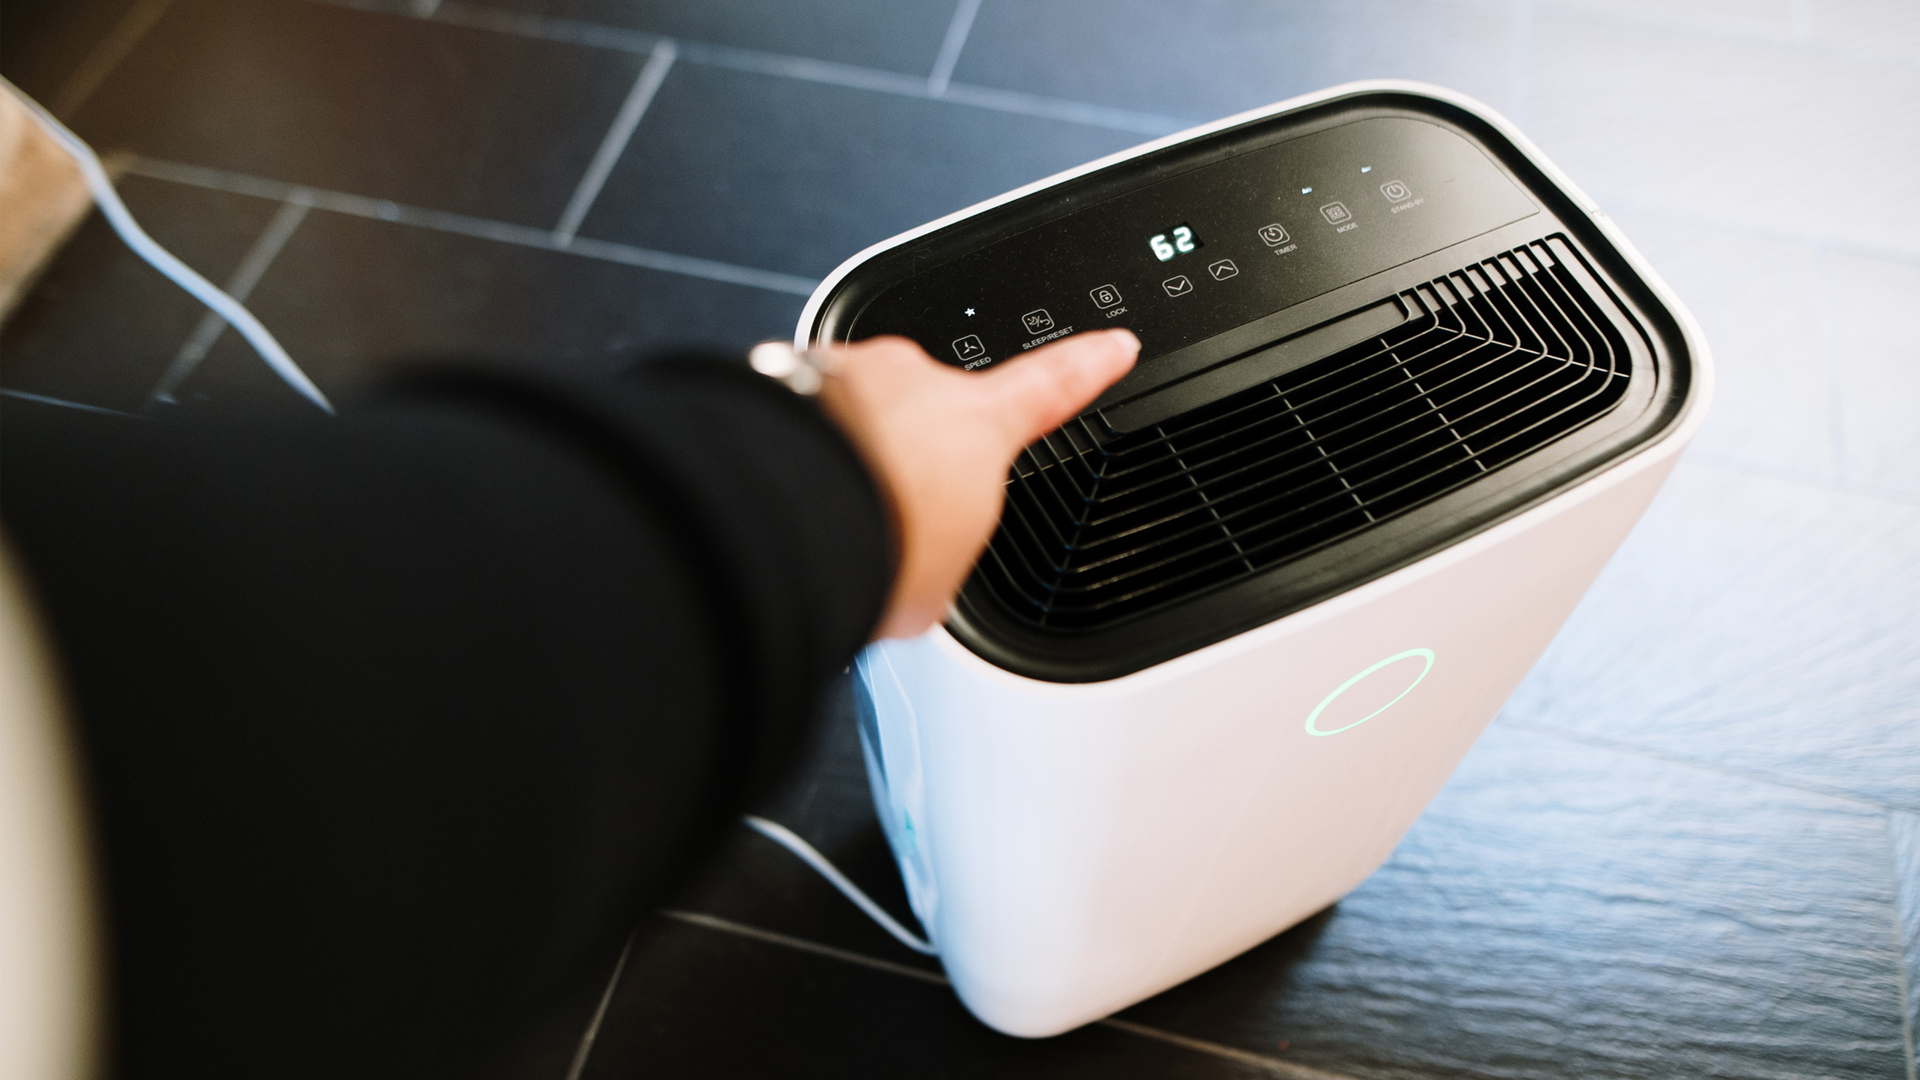 How to Use a Dehumidifier in Your Home